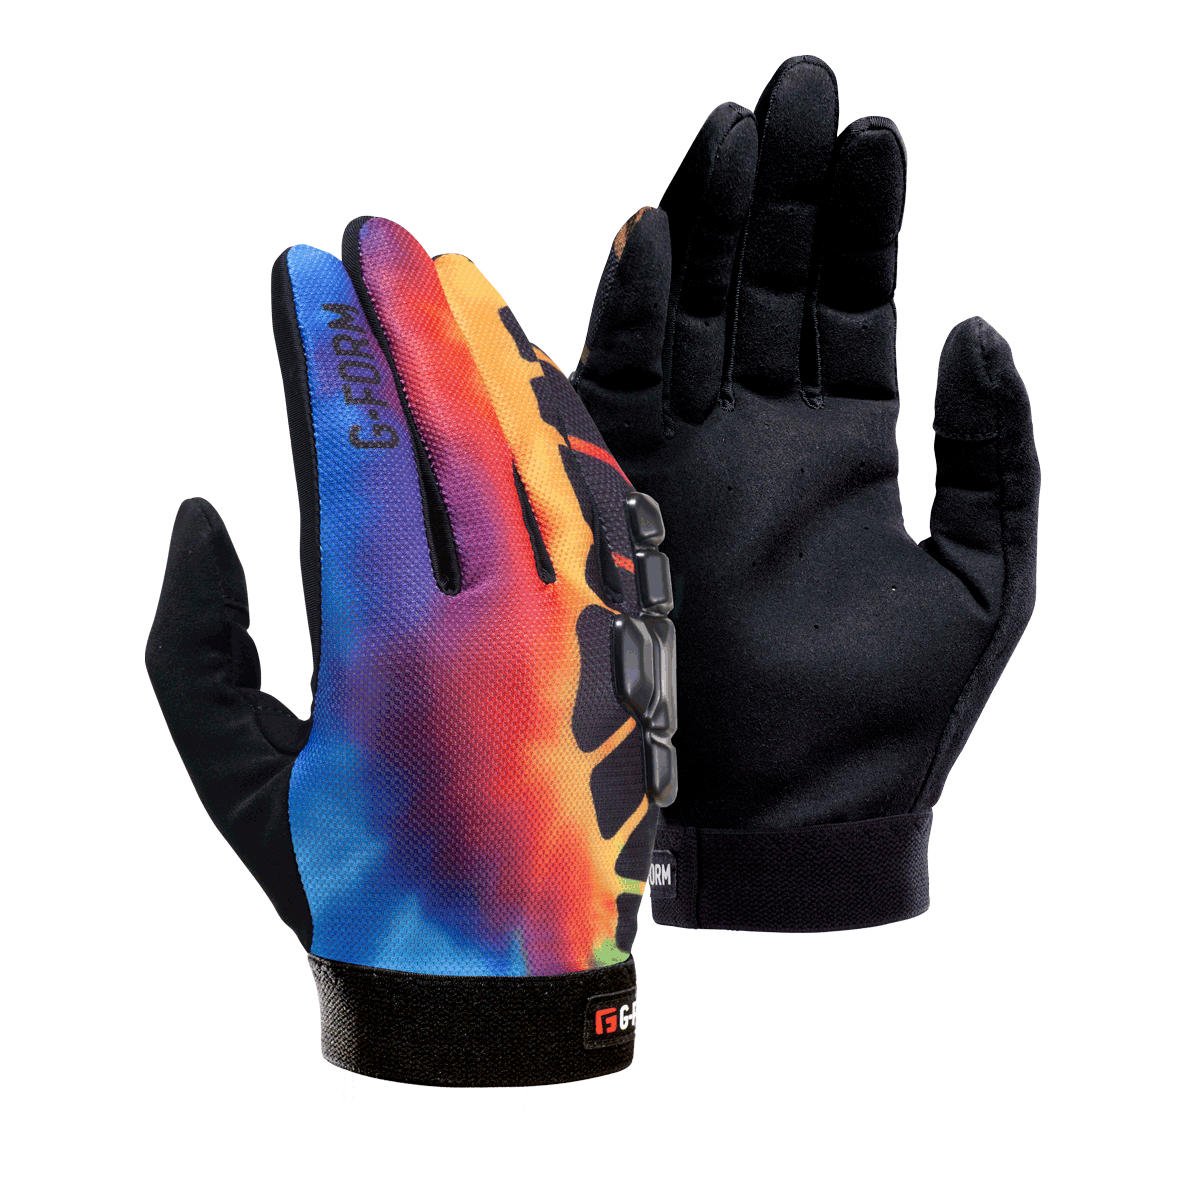 Sorata 2 Heavy Duty Mountain Biking Gloves padded riding Gloves hand protection washable adult youth gloves